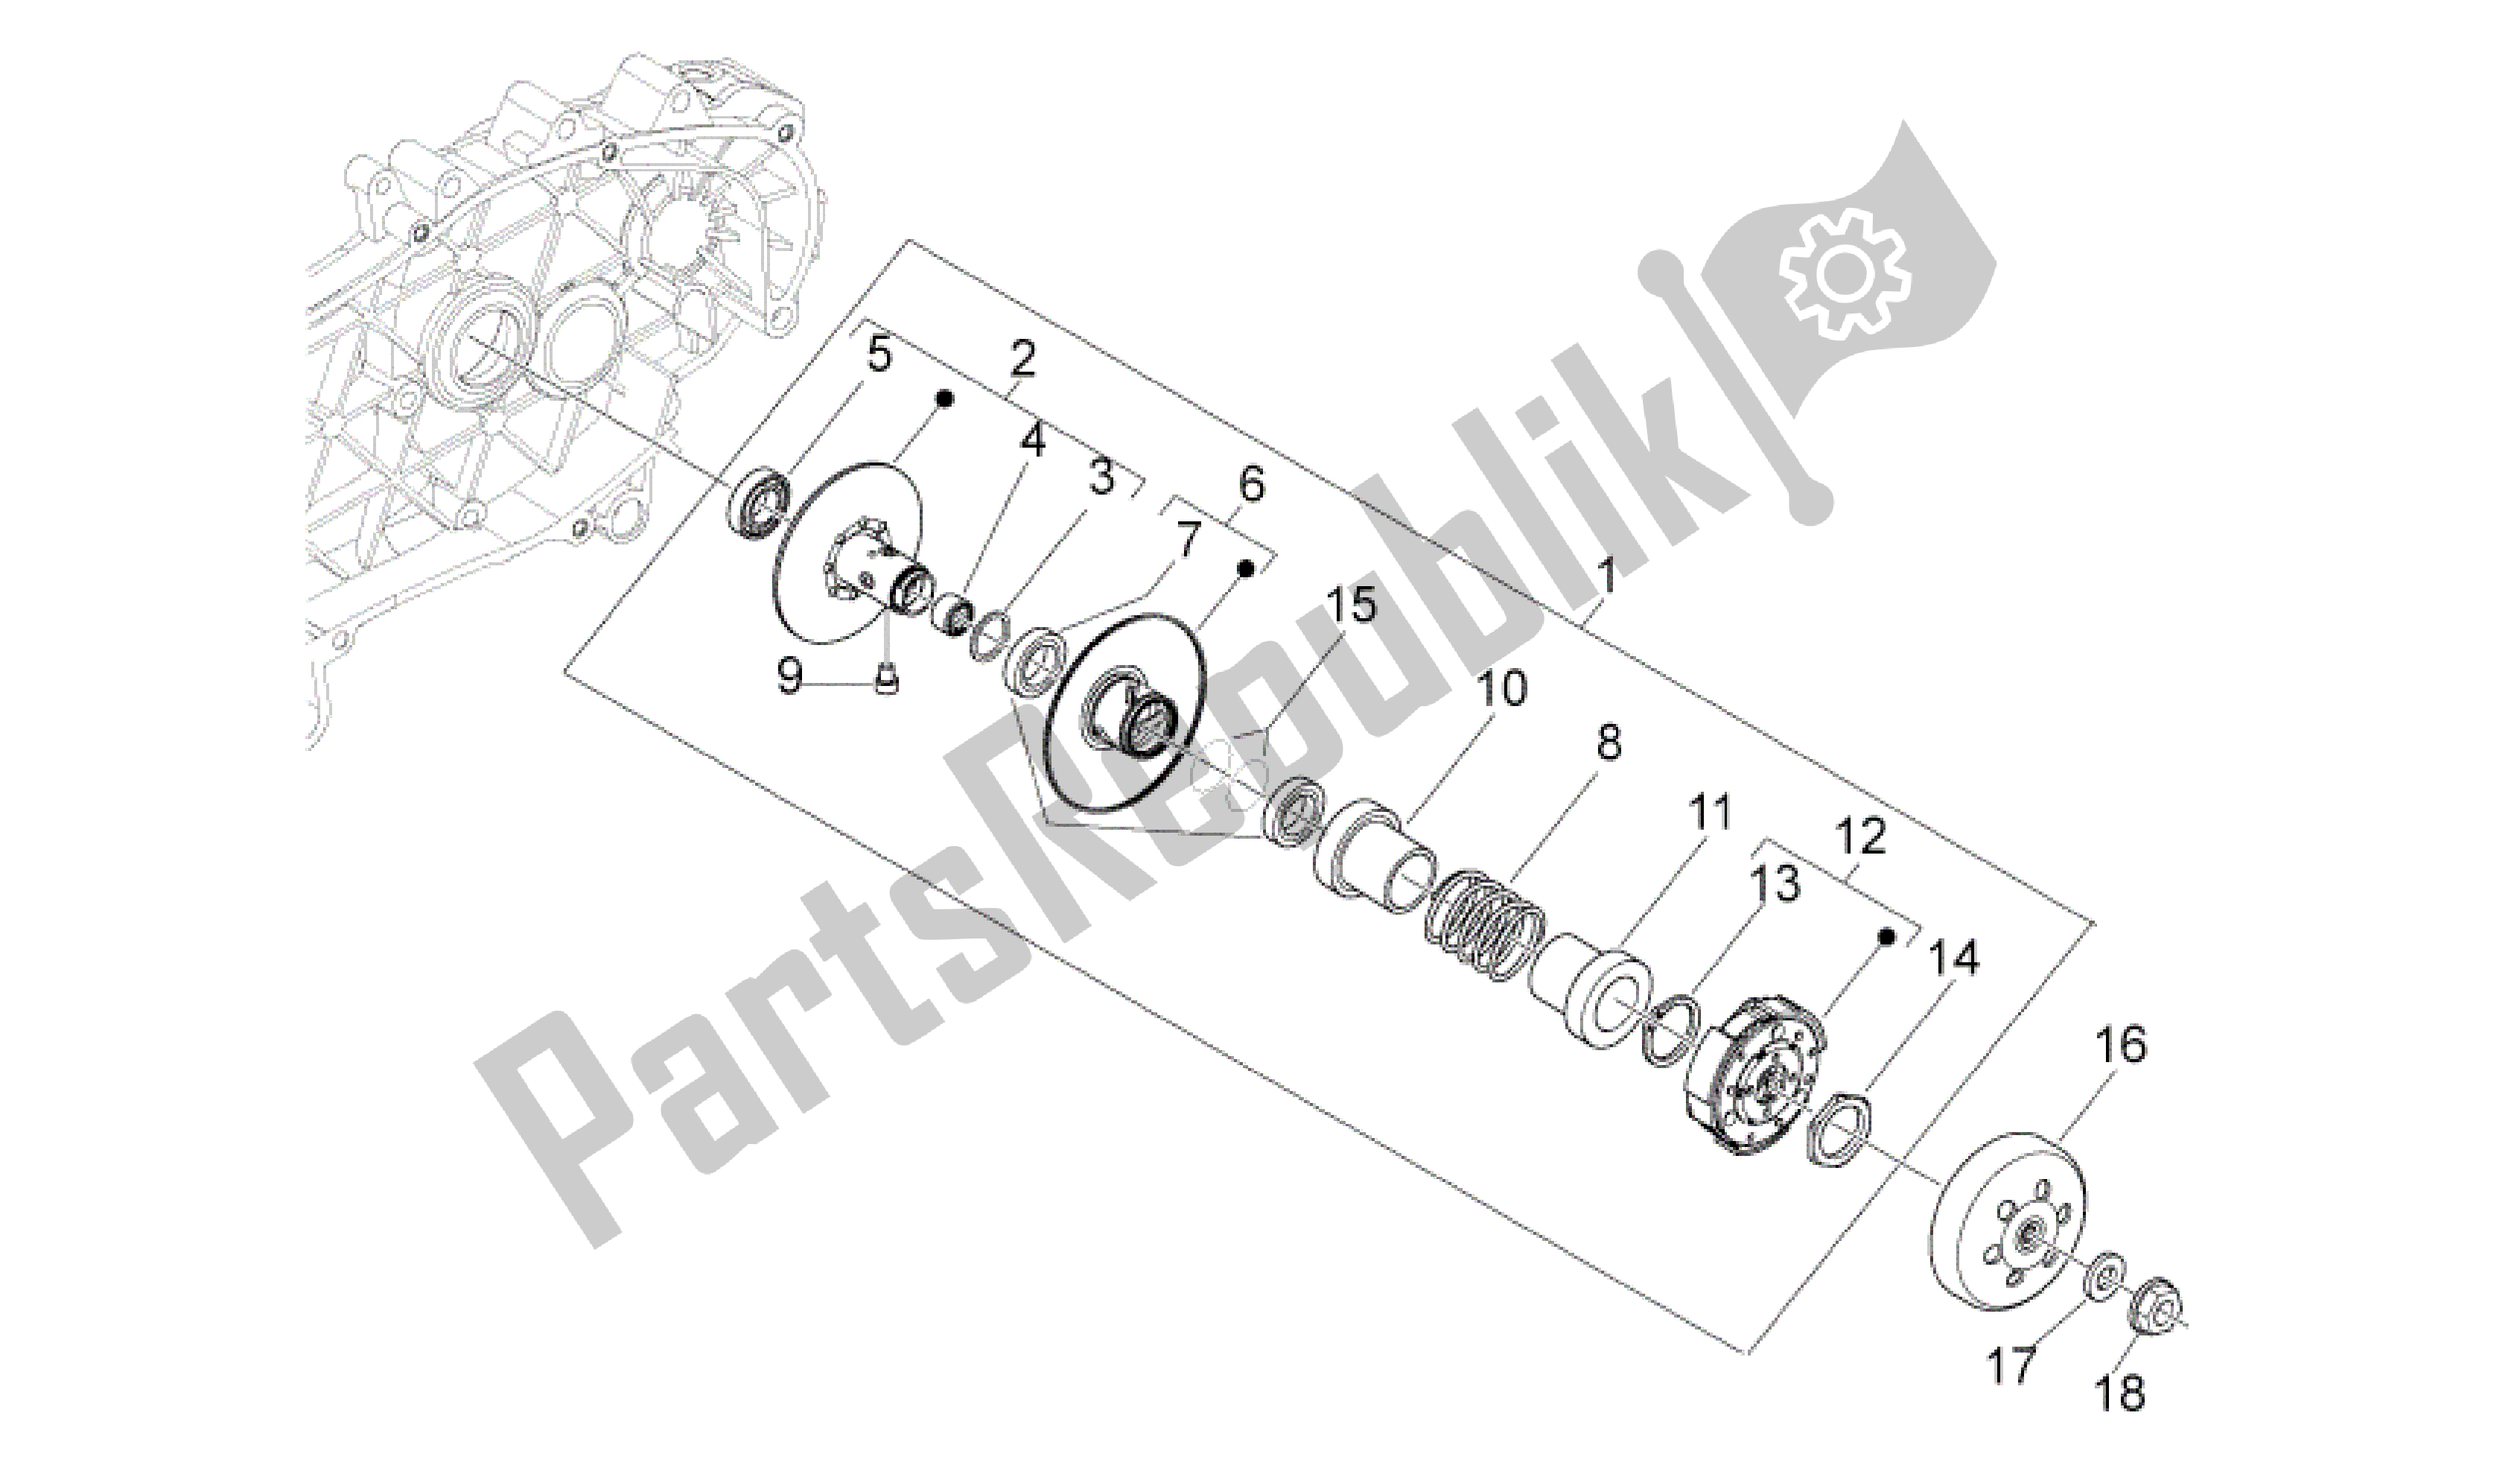 All parts for the Clutch of the Aprilia Sport City 125 2008 - 2010